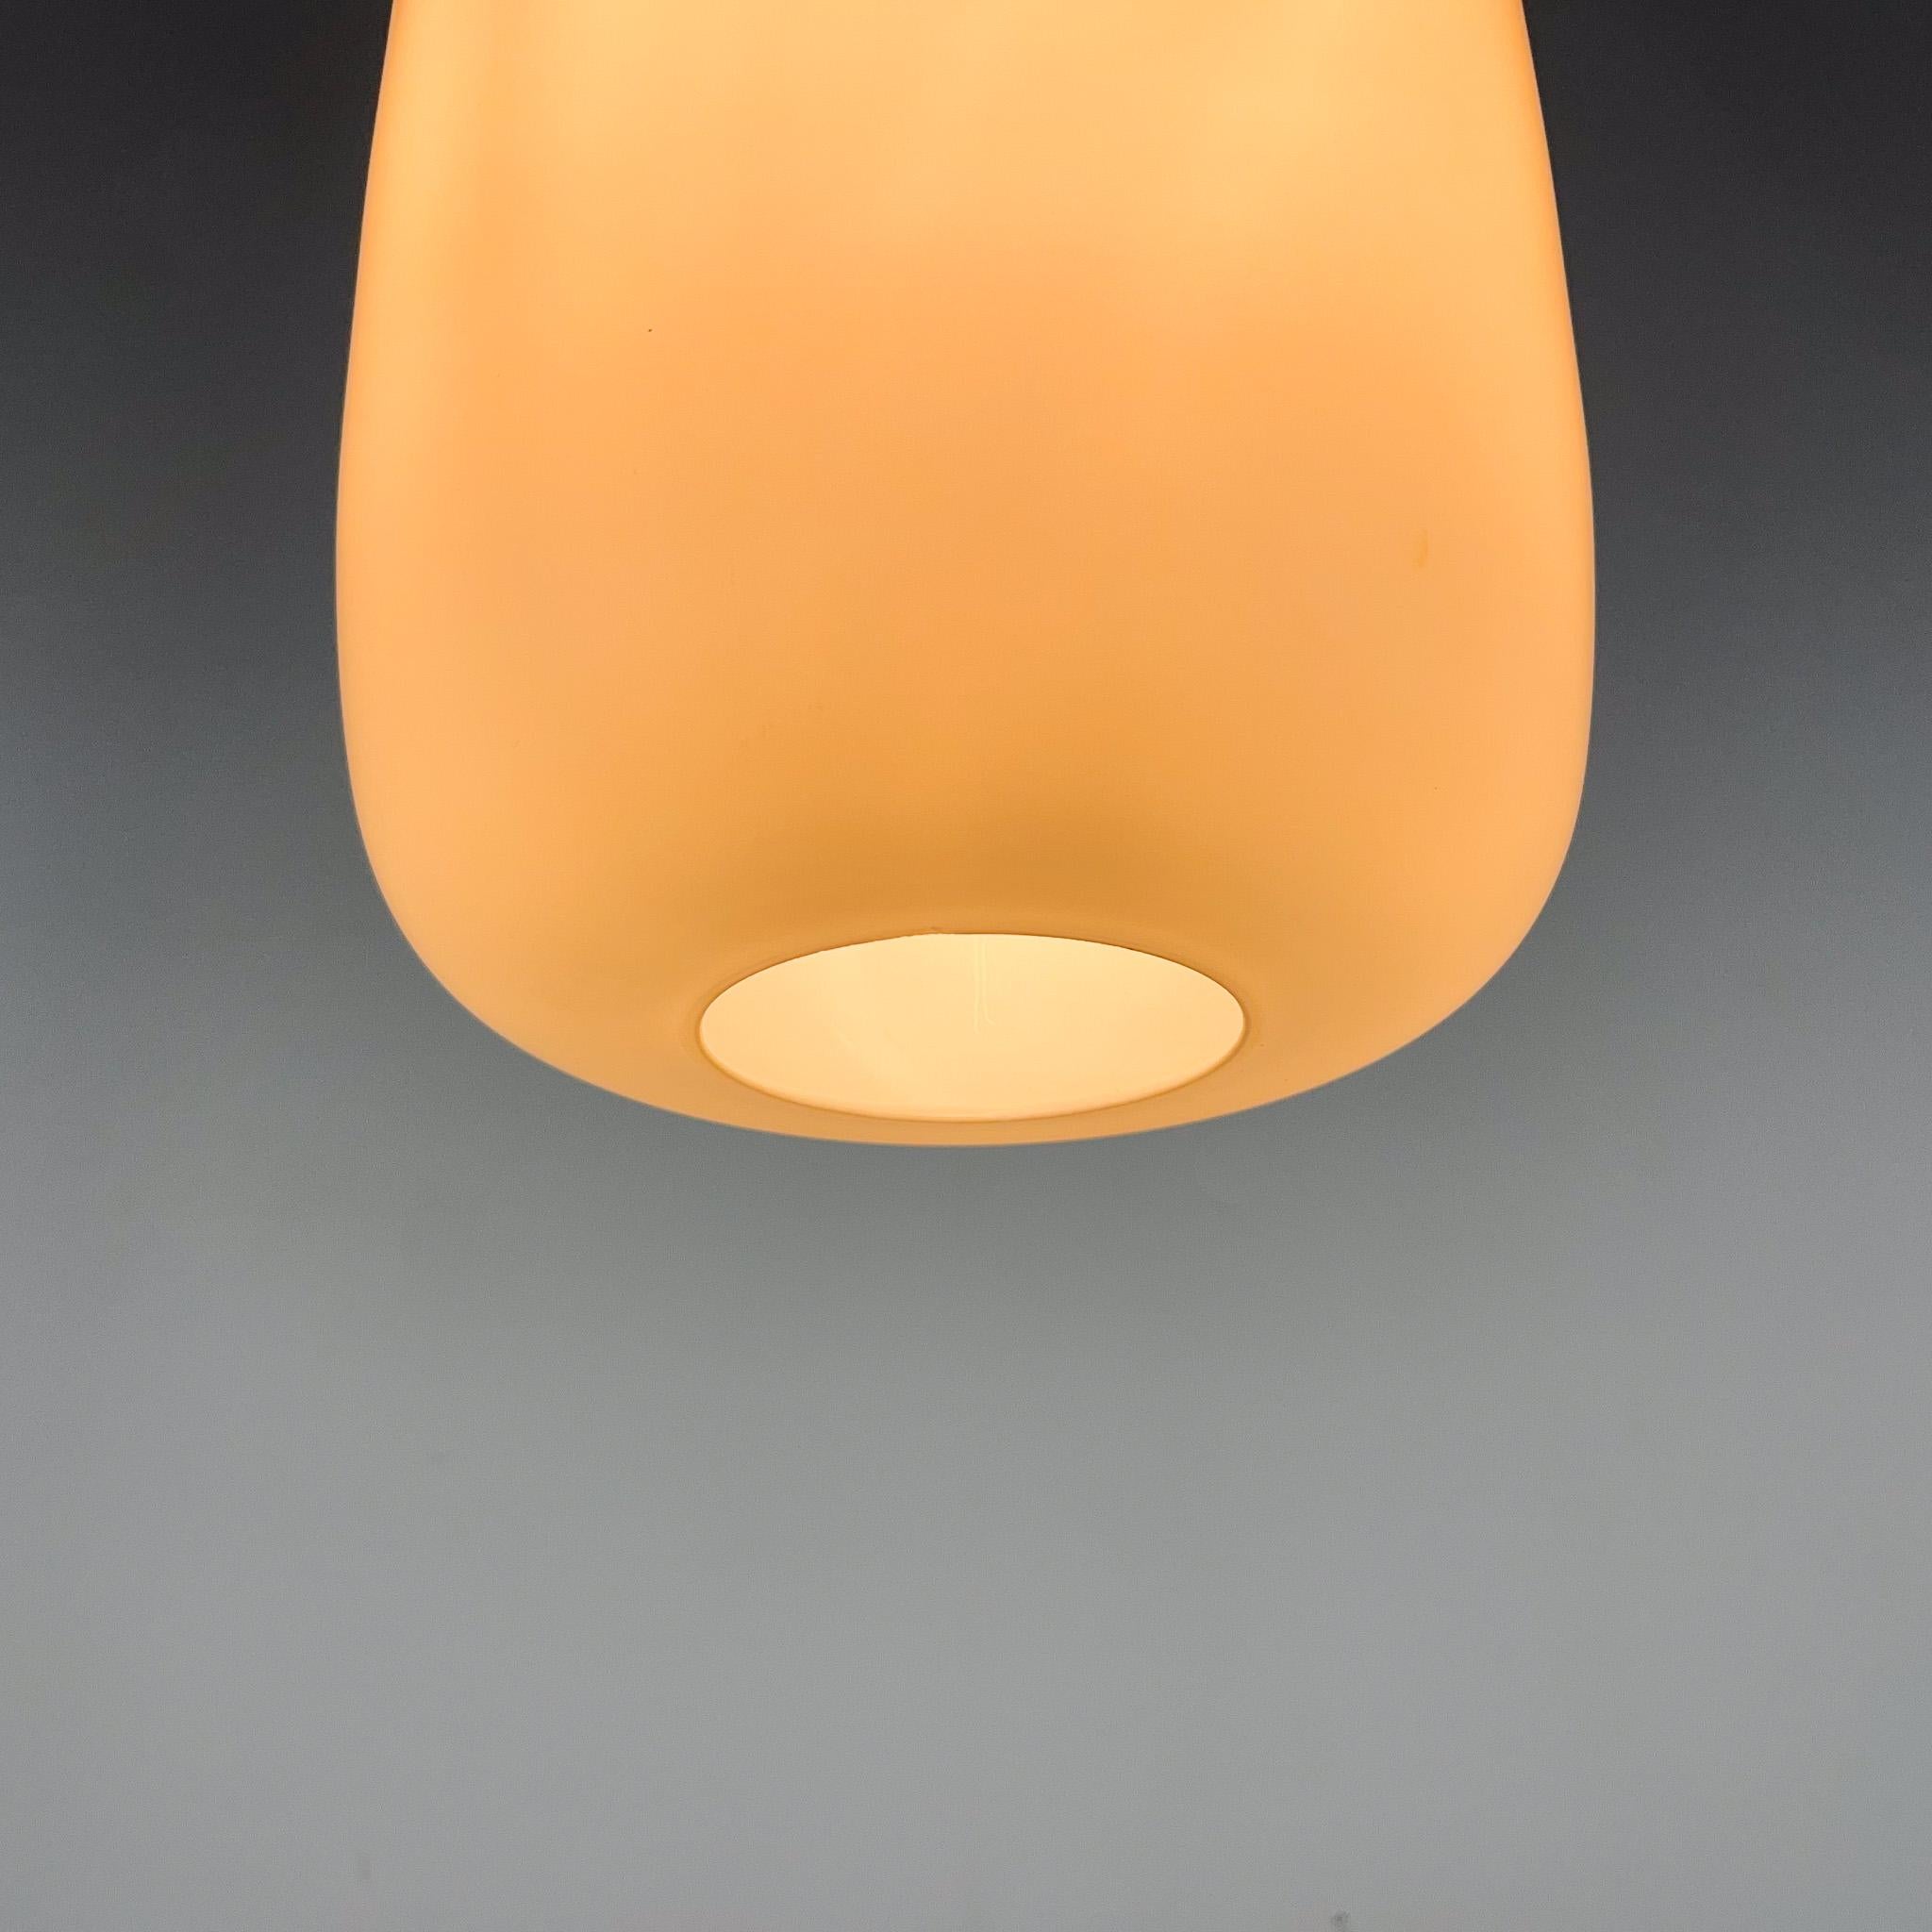 1960s Wood and Glass Midcentury Pendant Light by ULUV, Czechoslovakia For Sale 2